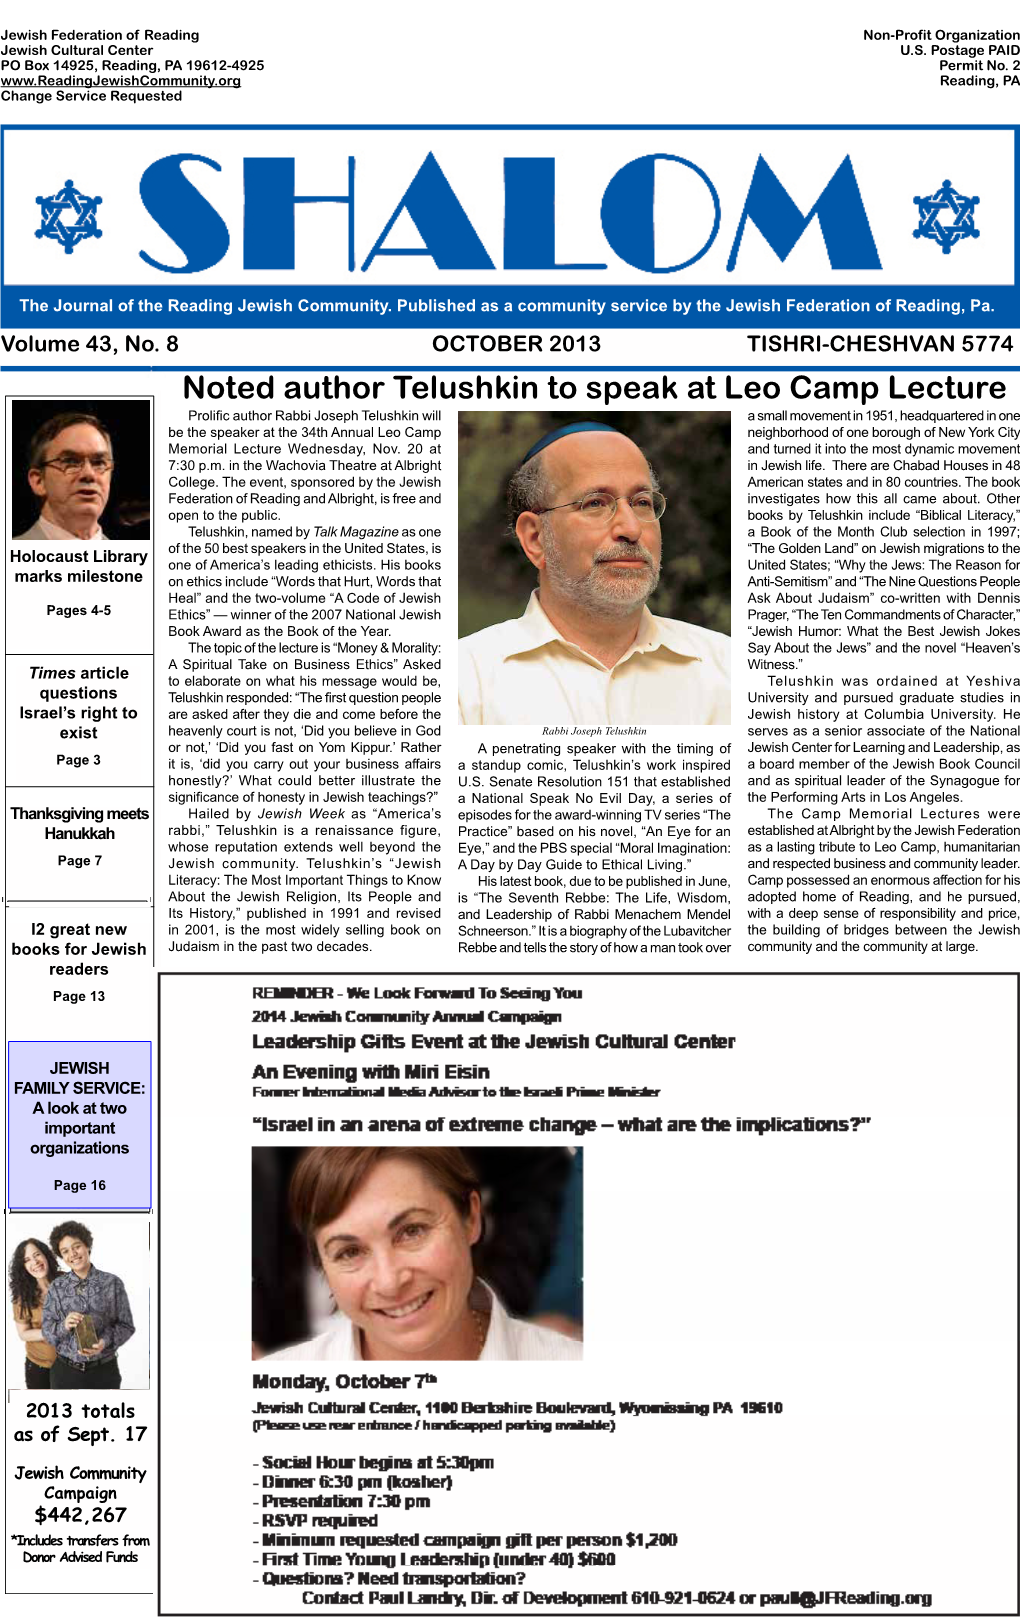 Making Sur Noted Author Telushkin to Speak at Leo Camp Lecture